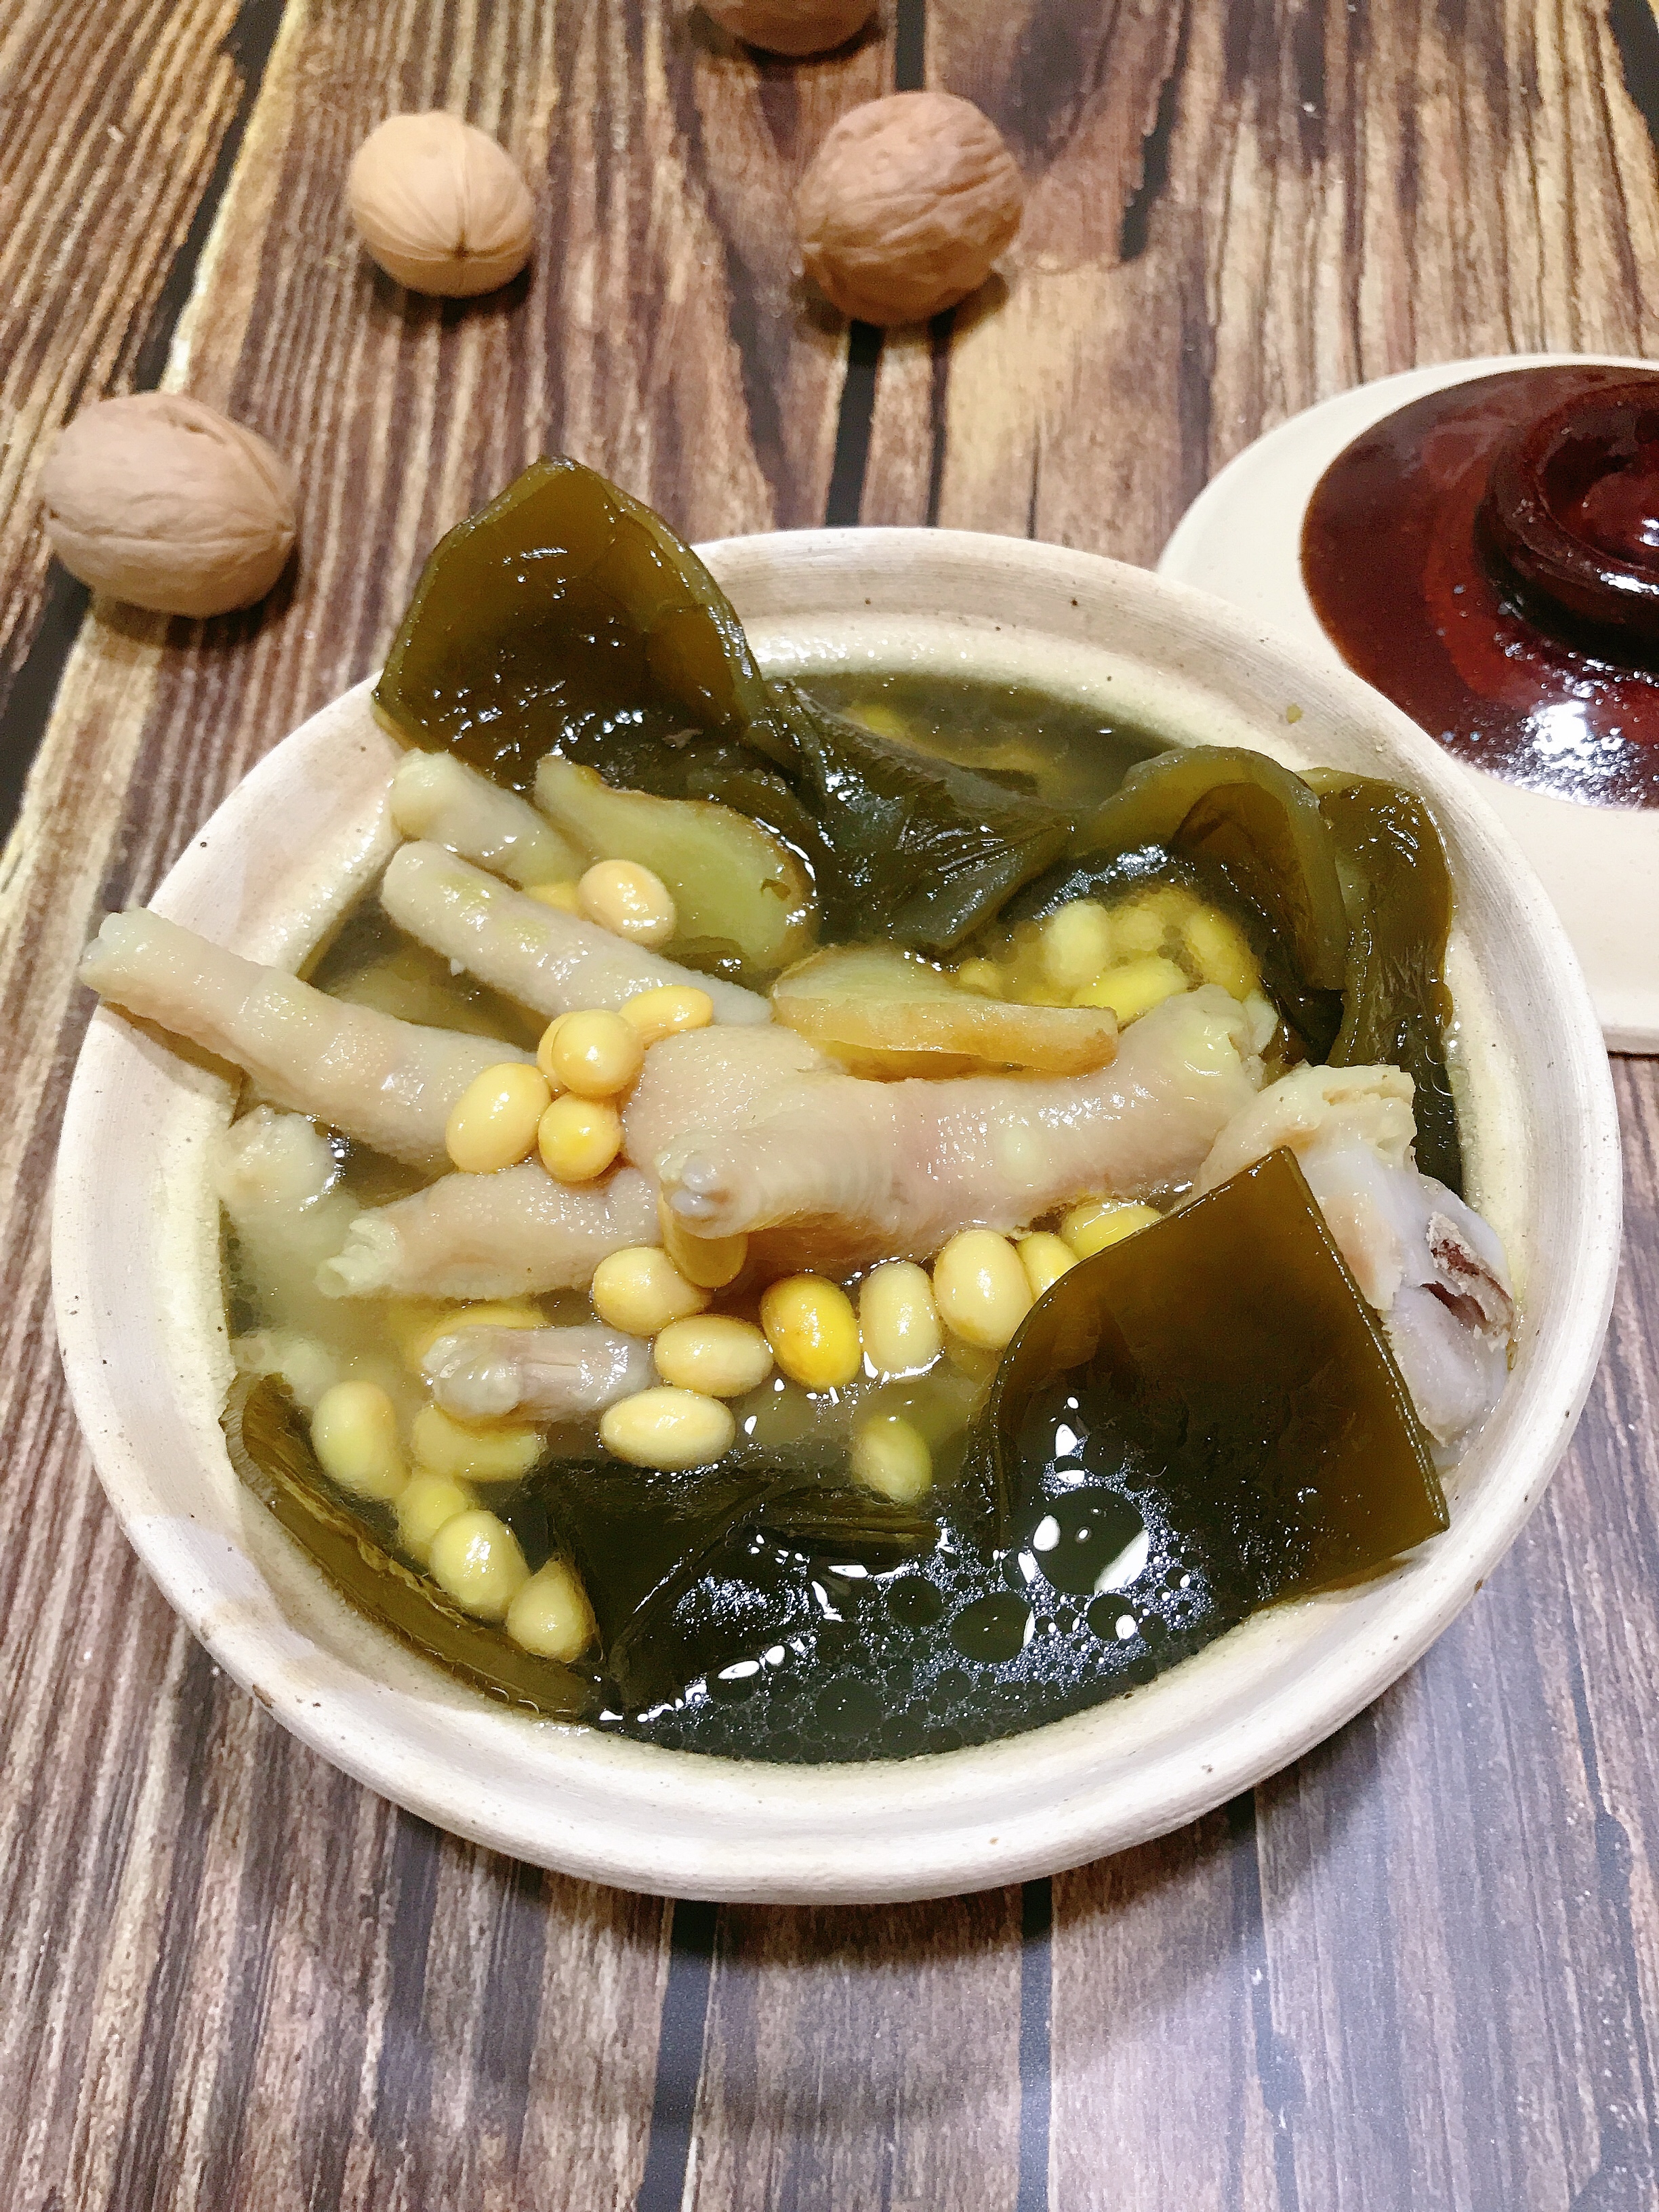 
Ungual soup of chicken of kelp soya bean - the practice of full collagen